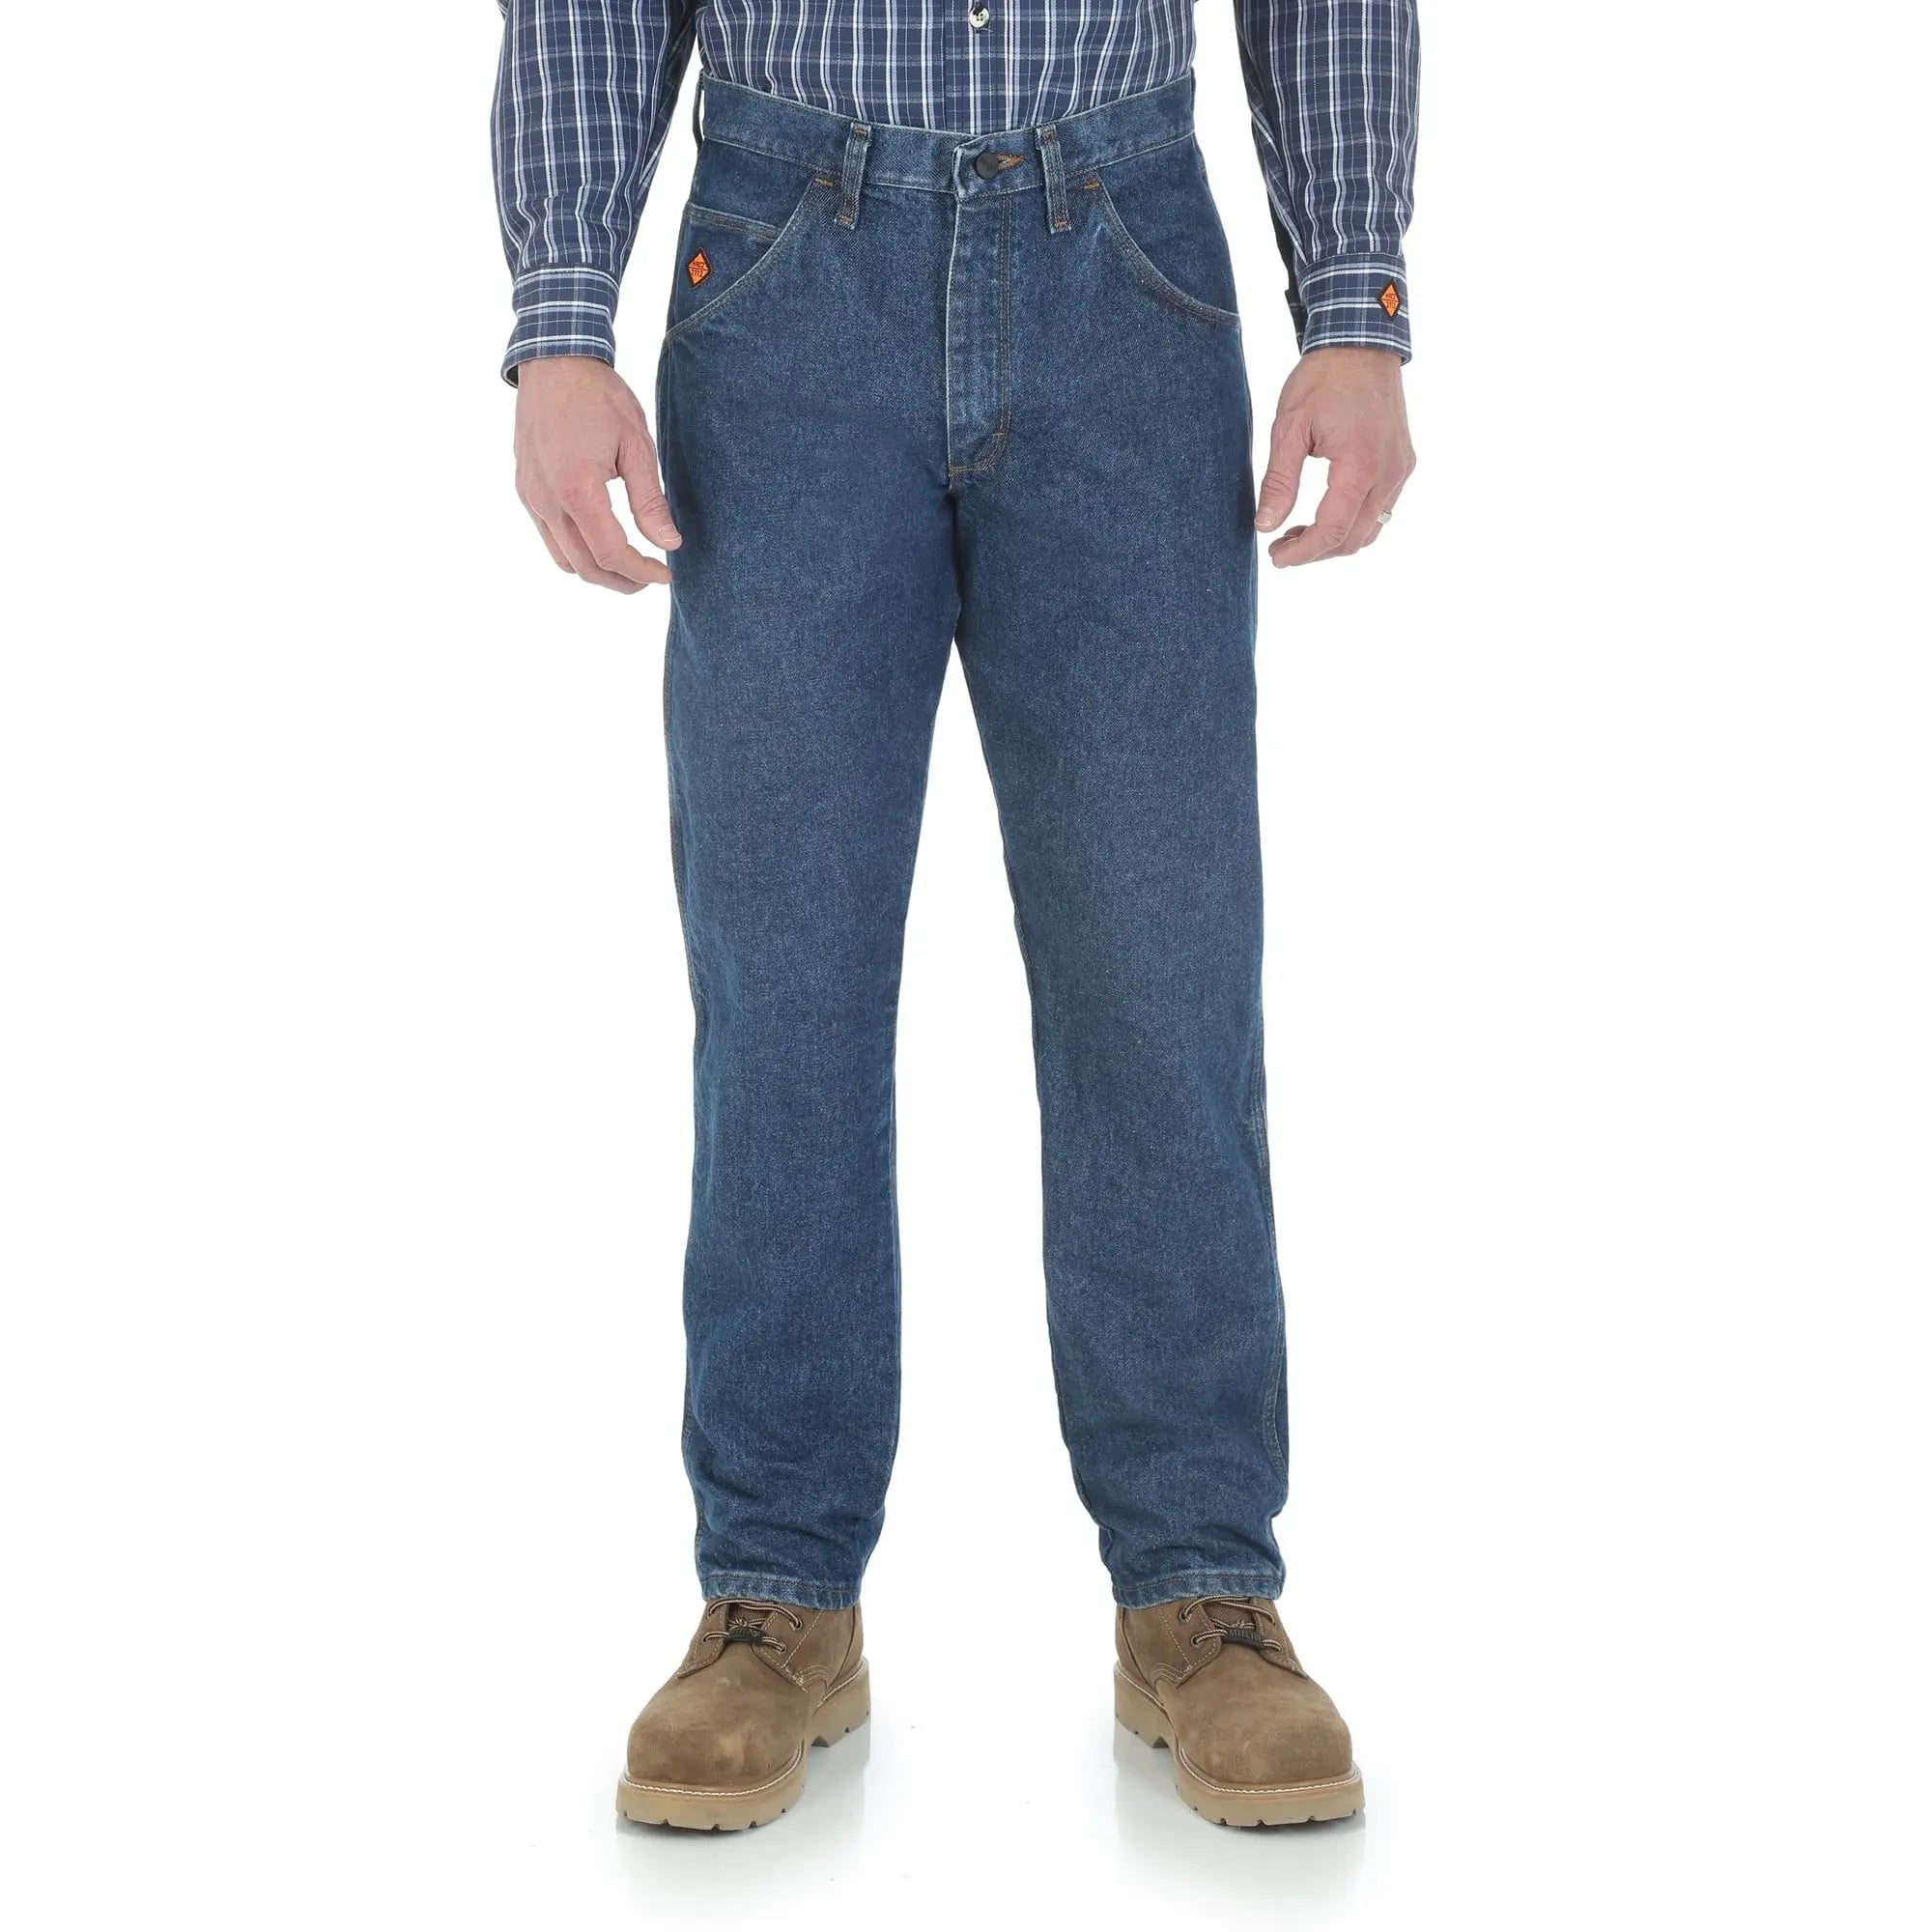 WRANGLER - RIGGS - Relaxed Fit FR Denim Jeans  Becker Safety and Supply